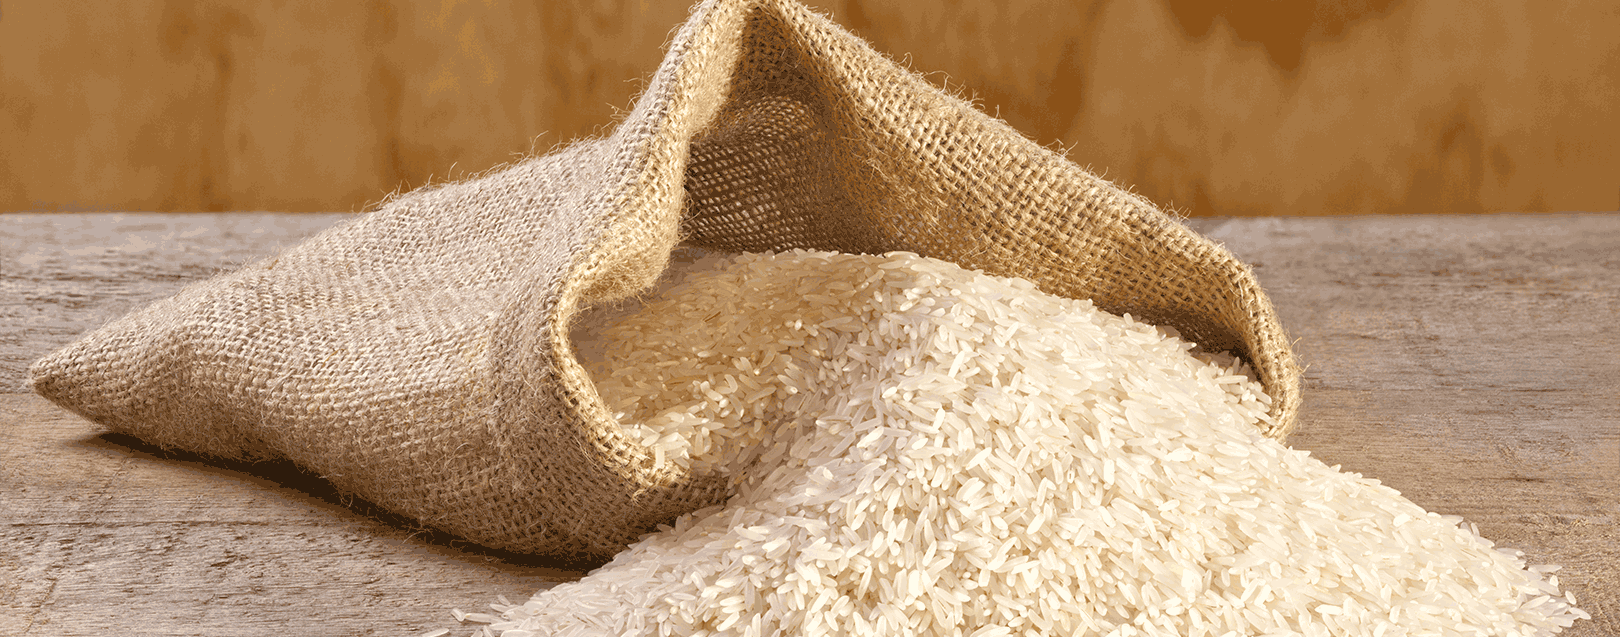 Basmati rice becomes India’s top exporting commodity